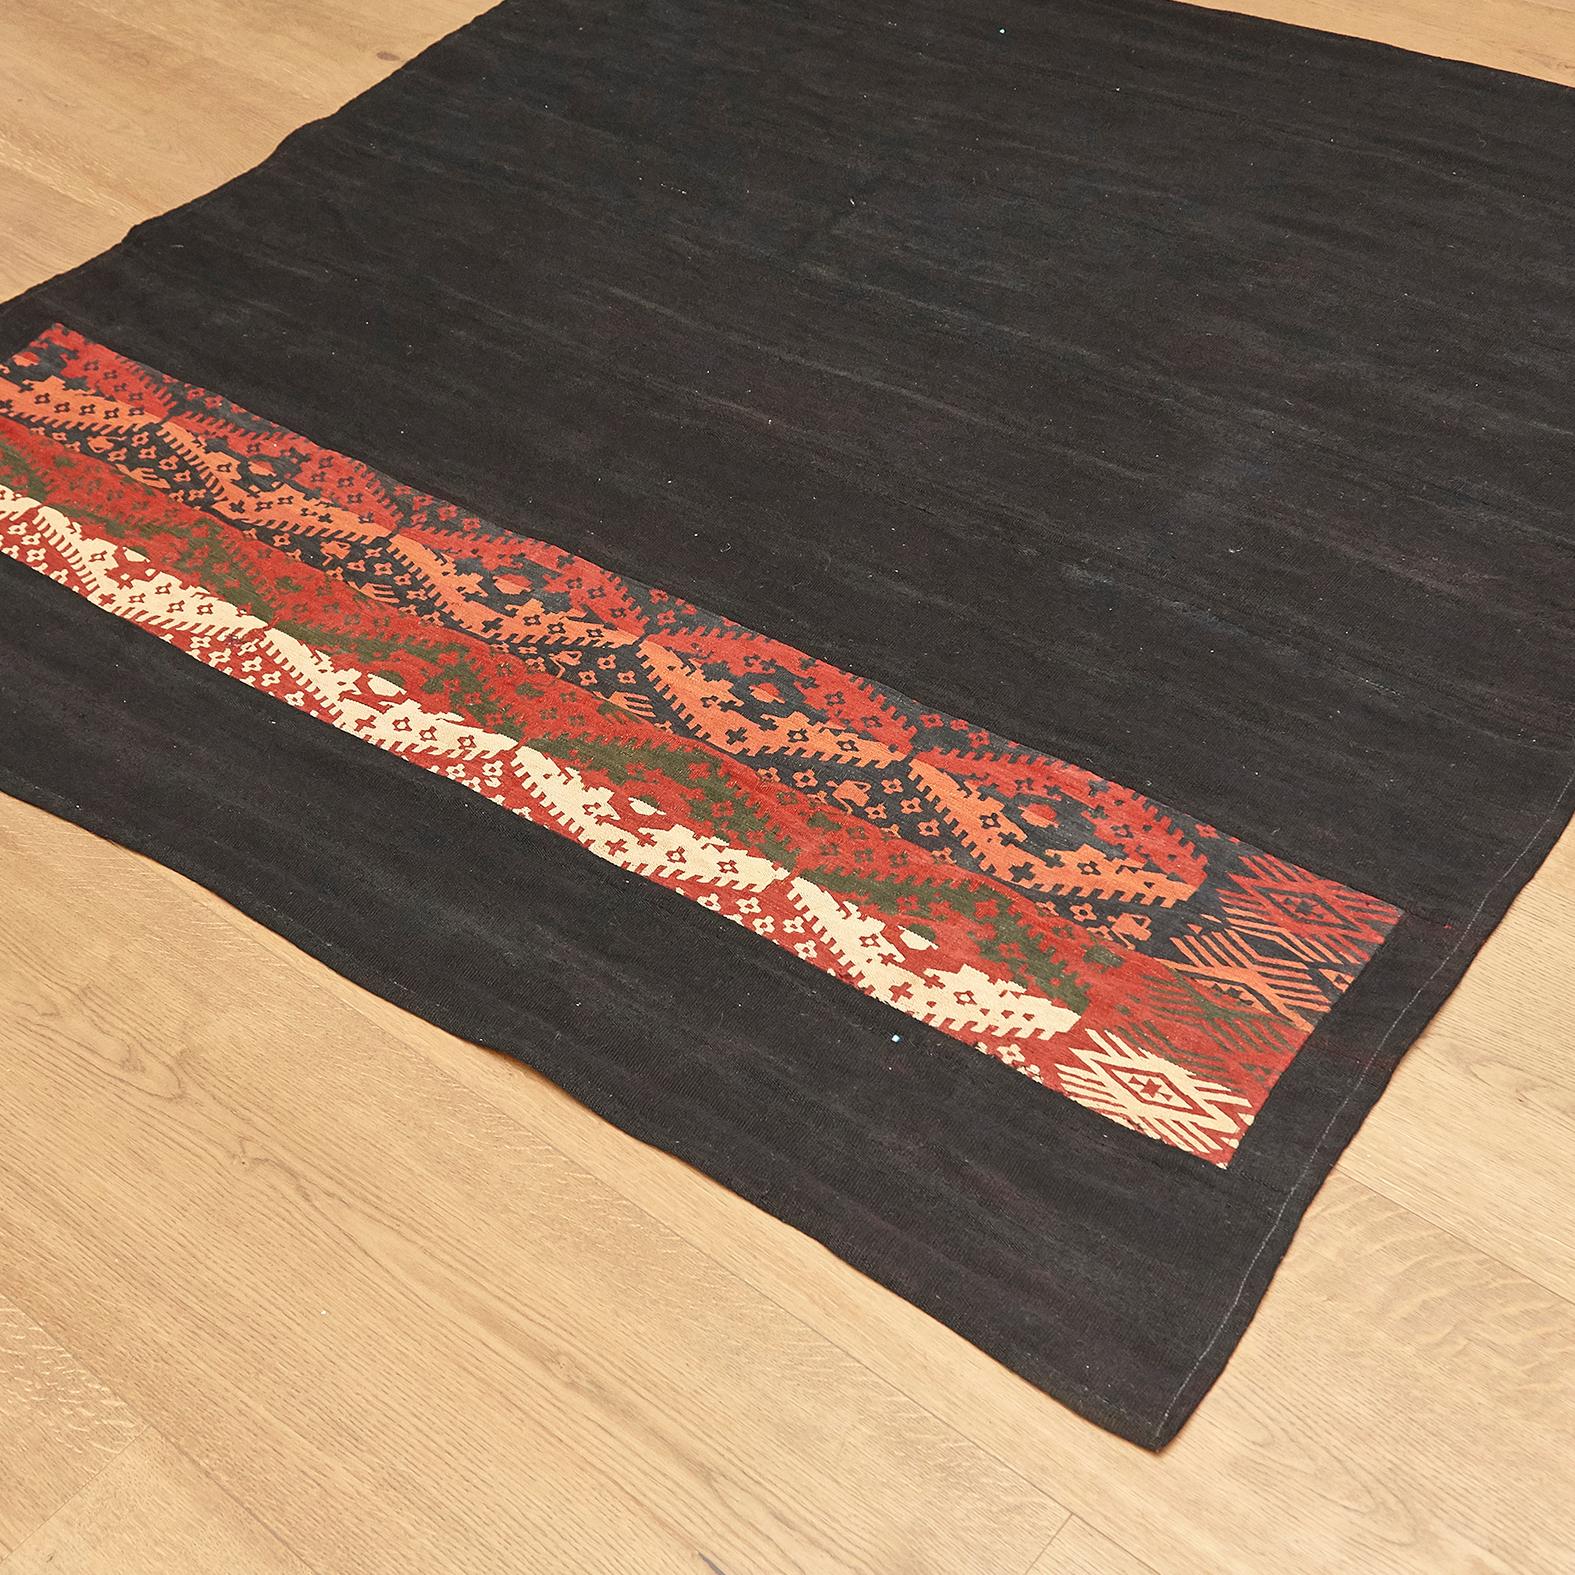 Hand-Knotted Van Turkey Hand Knotted Wool Red Green Blue Black Rug